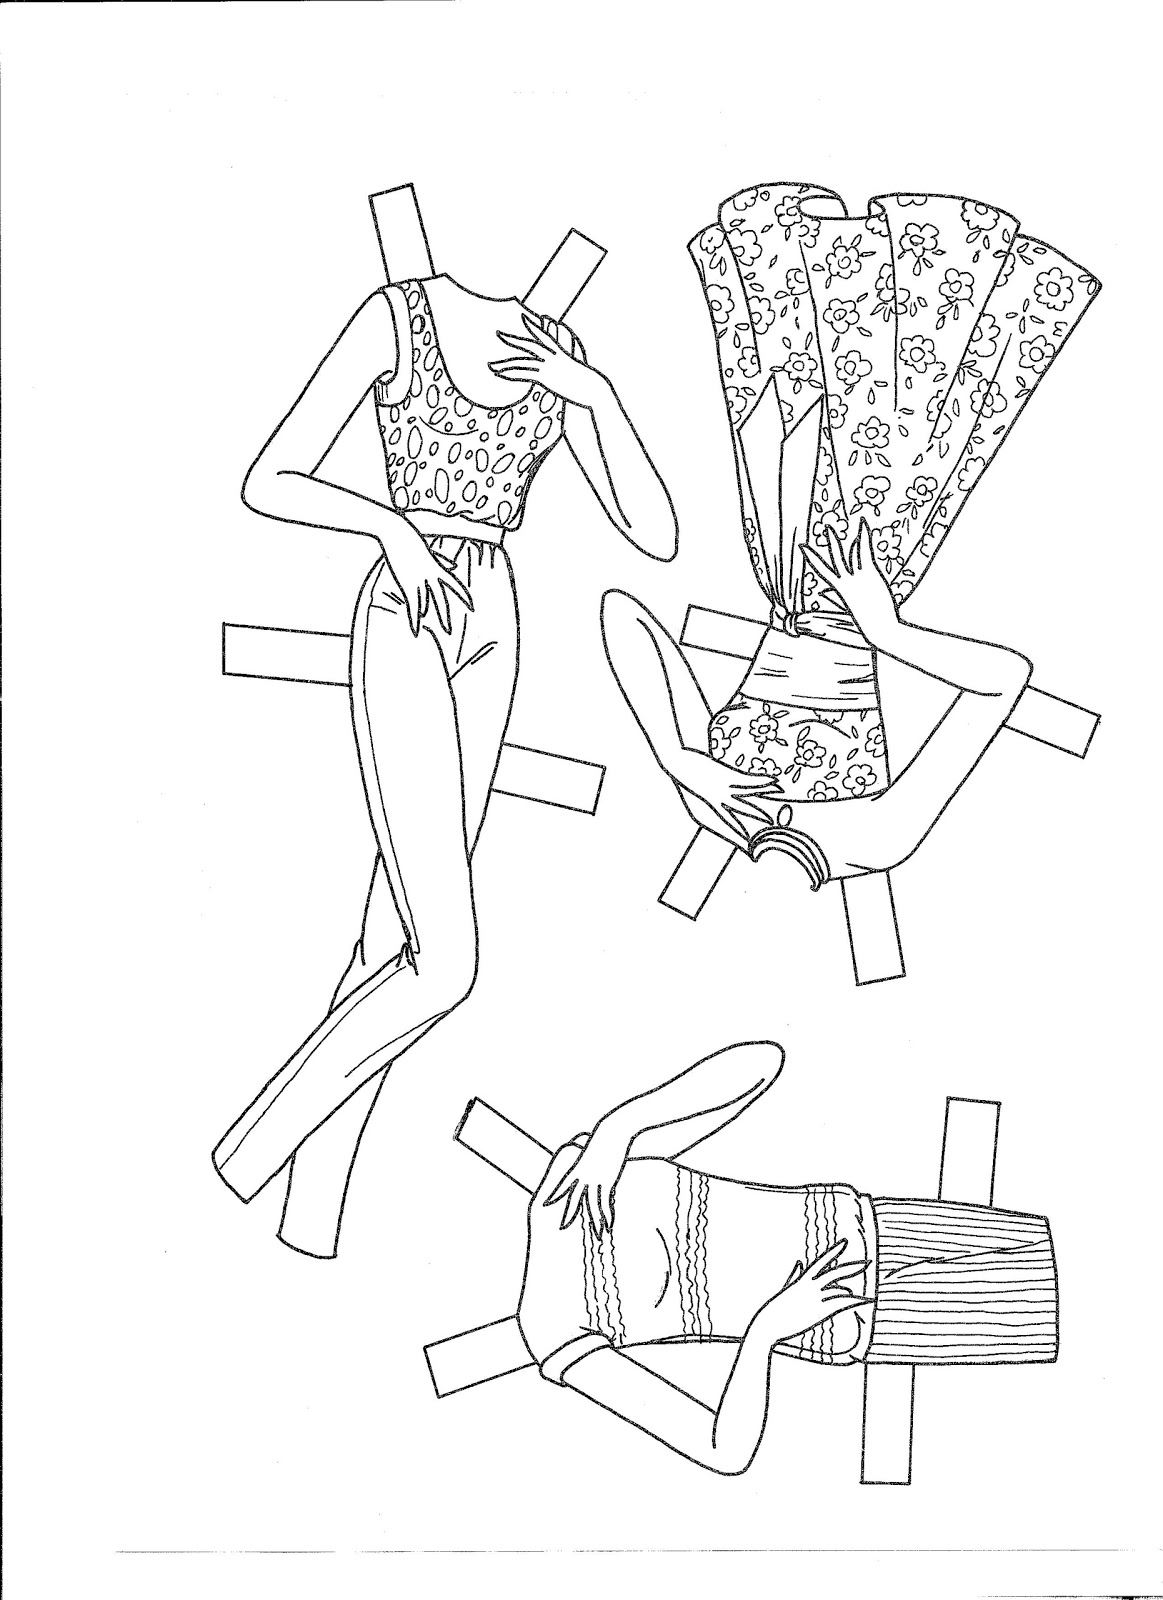 Mostly Paper Dolls Dress BARBIE For An Island Cruise